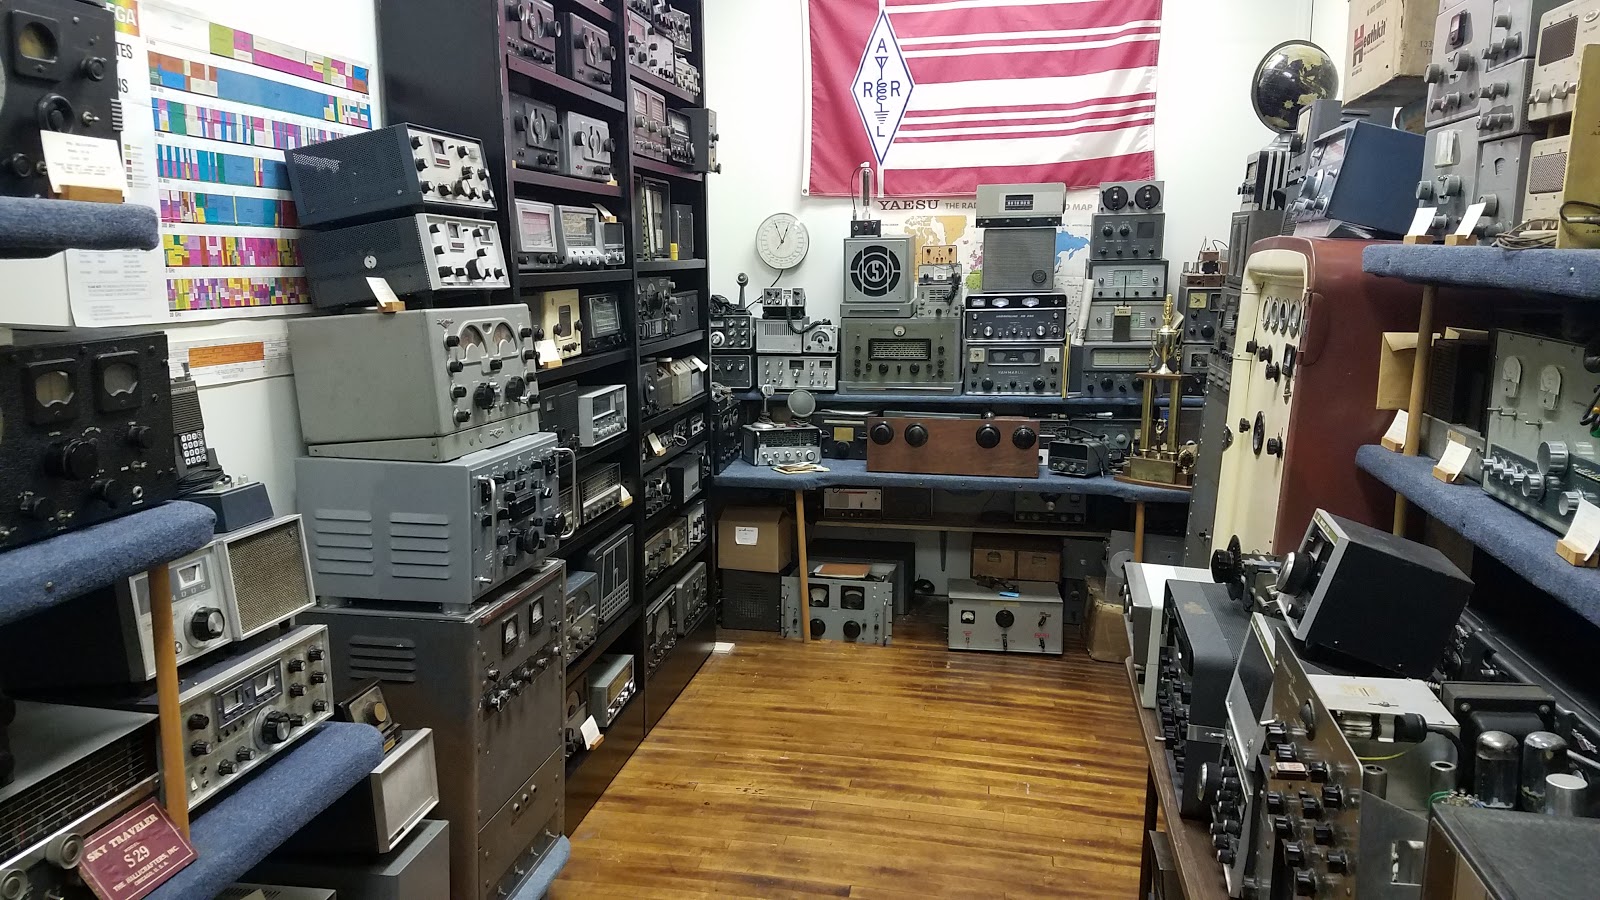 The Museum of Radio and Technology